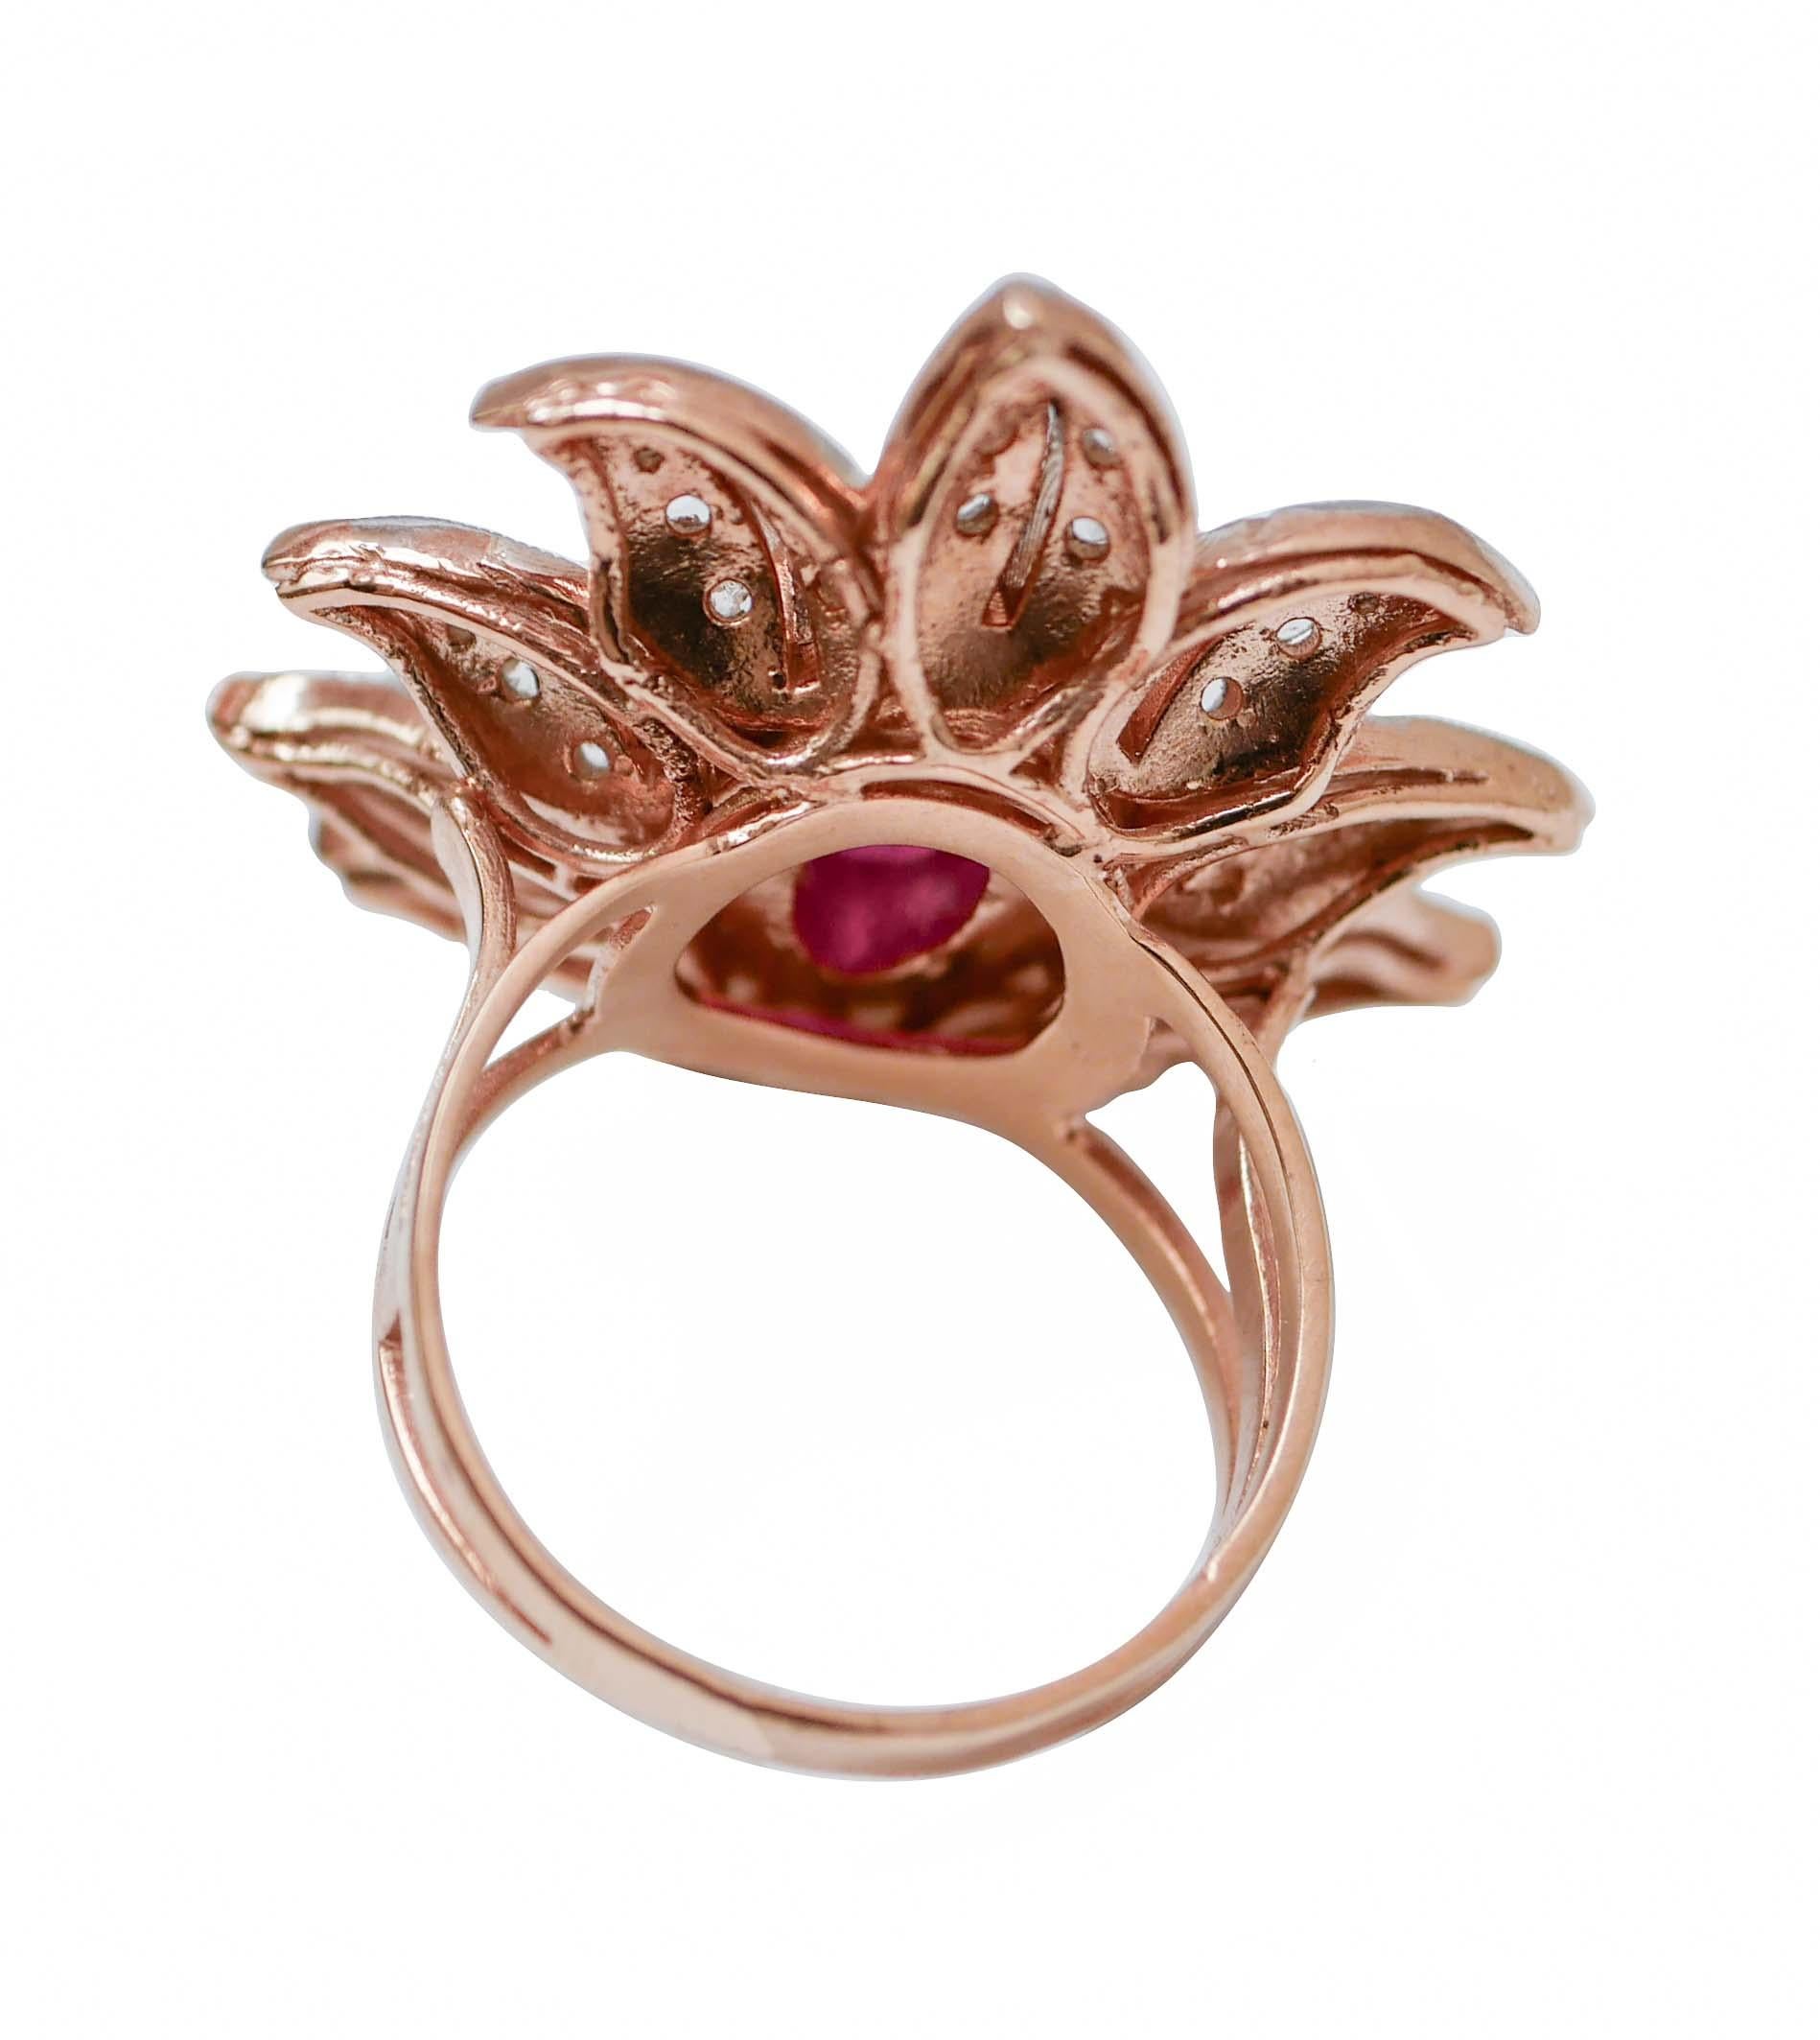 Retro Ruby, Diamonds, Rose Gold and Silver Flower Ring. For Sale